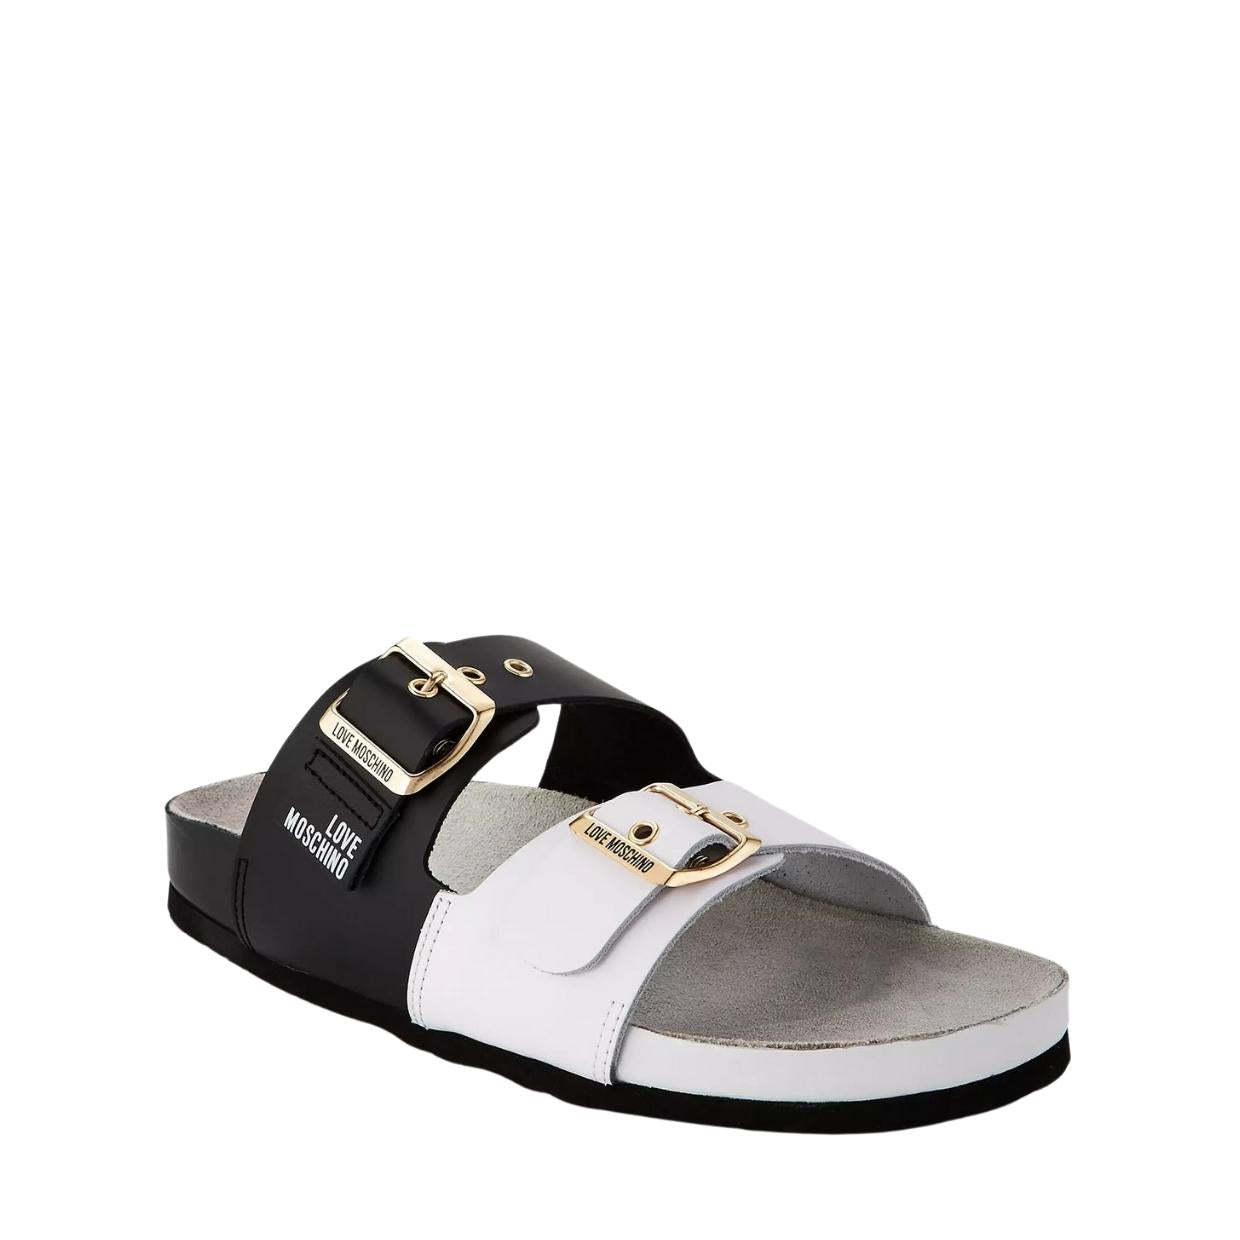 Love Moschino Two Buckle Black/White Sandals